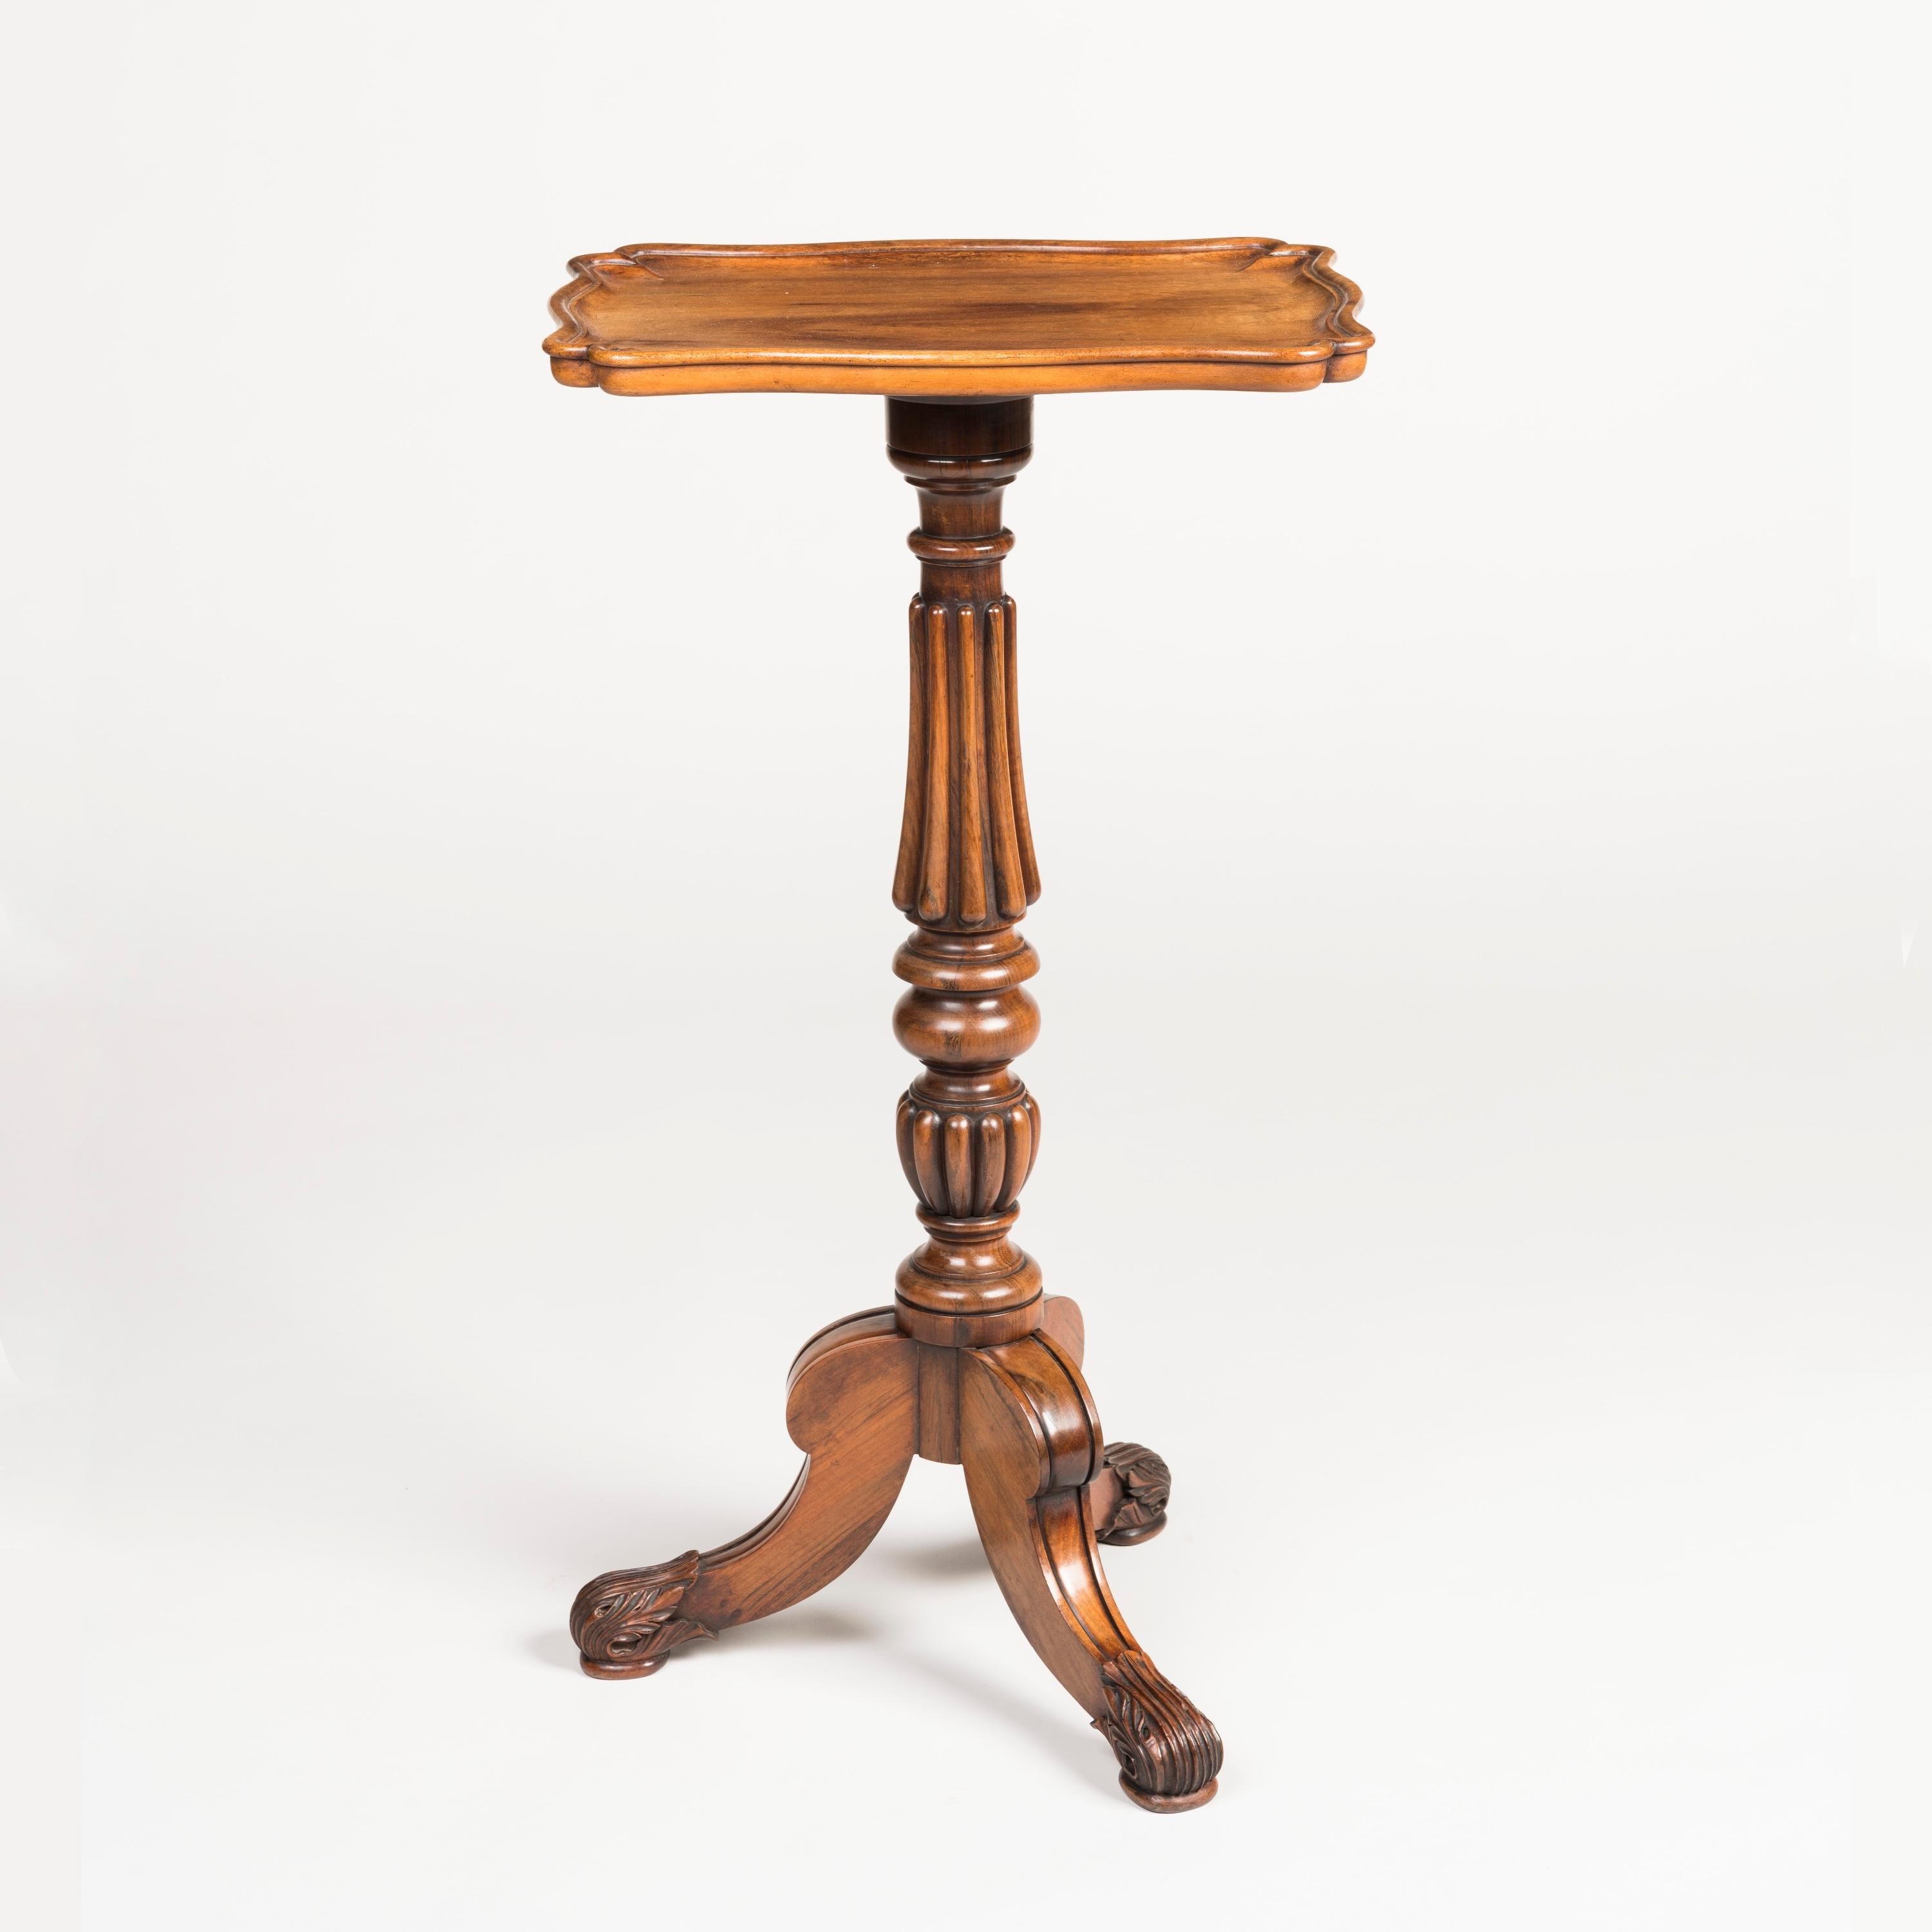 A Late Georgian Tripod Table

Constructed from well-figured rosewood, rising from tripod scrolled feet, in the Grecian taste, with lobed and ring-turned central stem supporting a moulded rectangular dished top.
Circa 1825.

